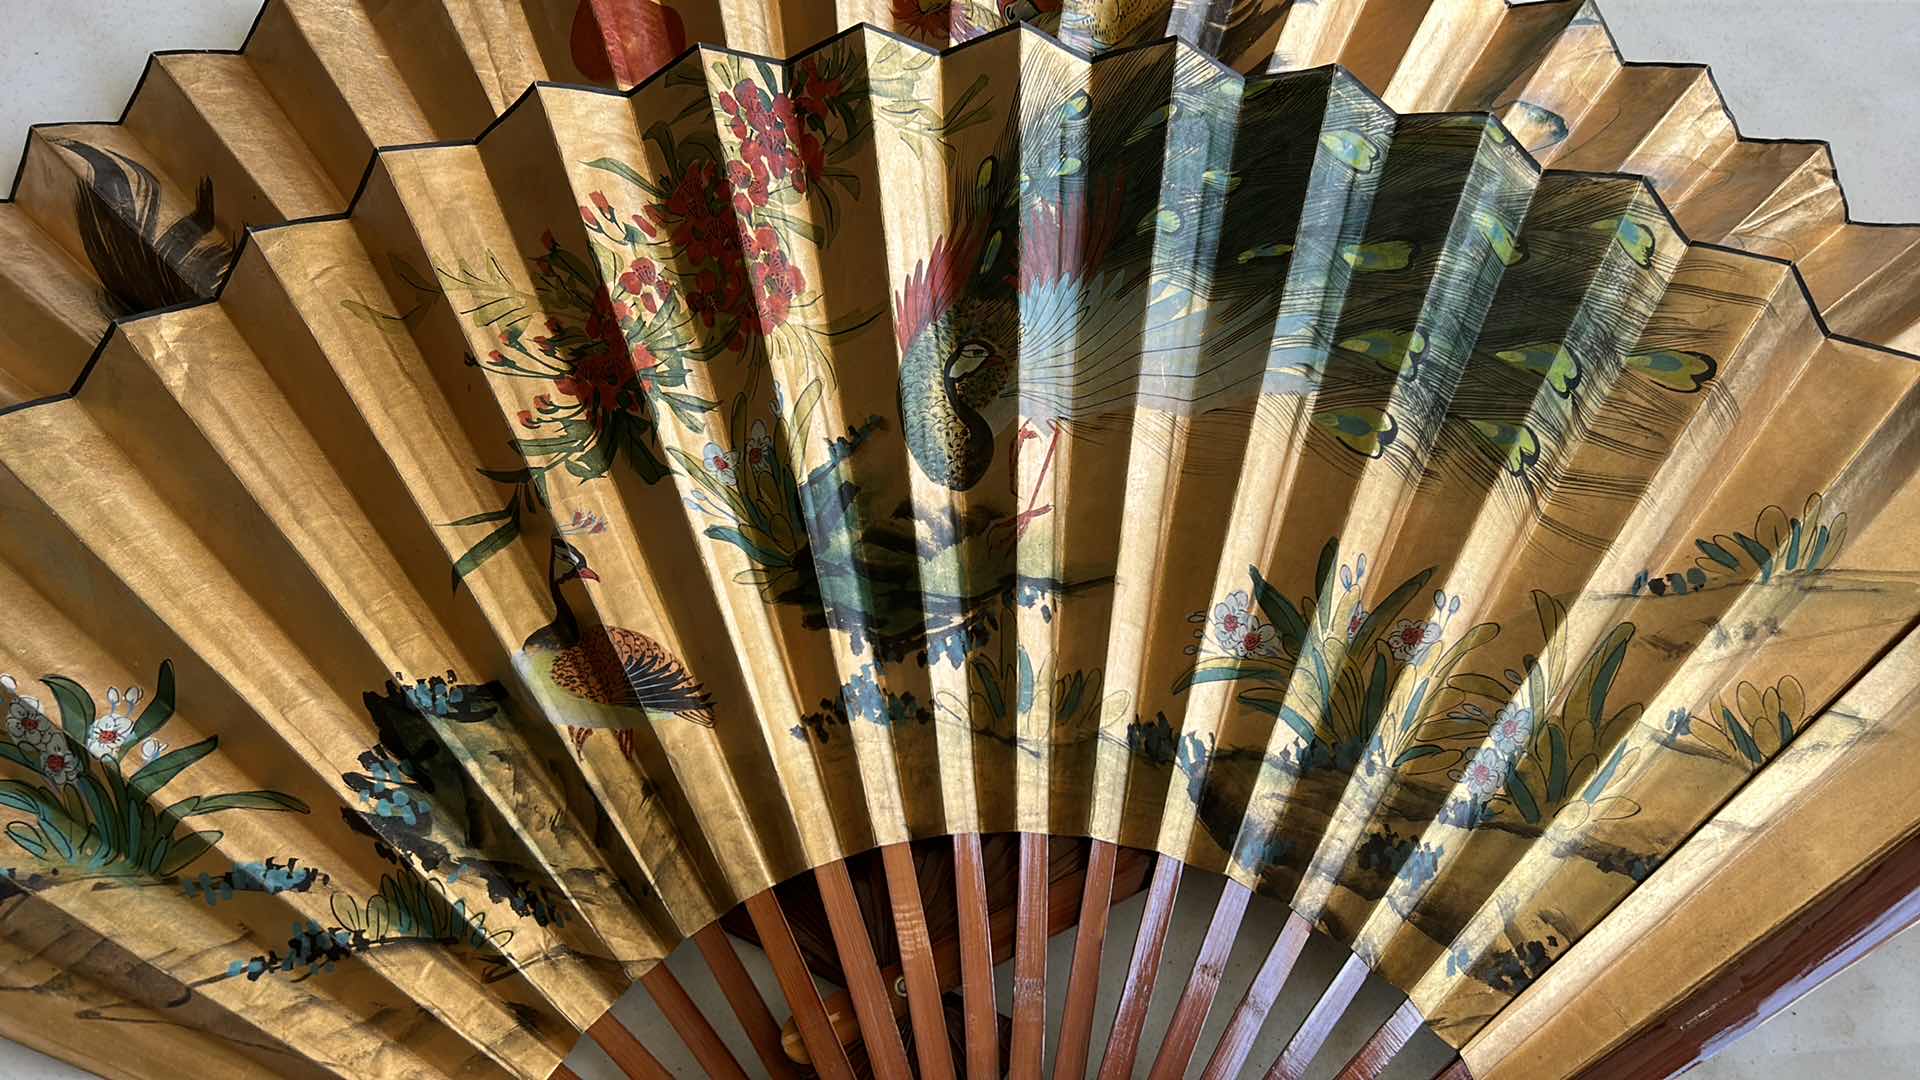 Photo 2 of 2 LARGE HAND-PAINTED FANS 5’ x 3’